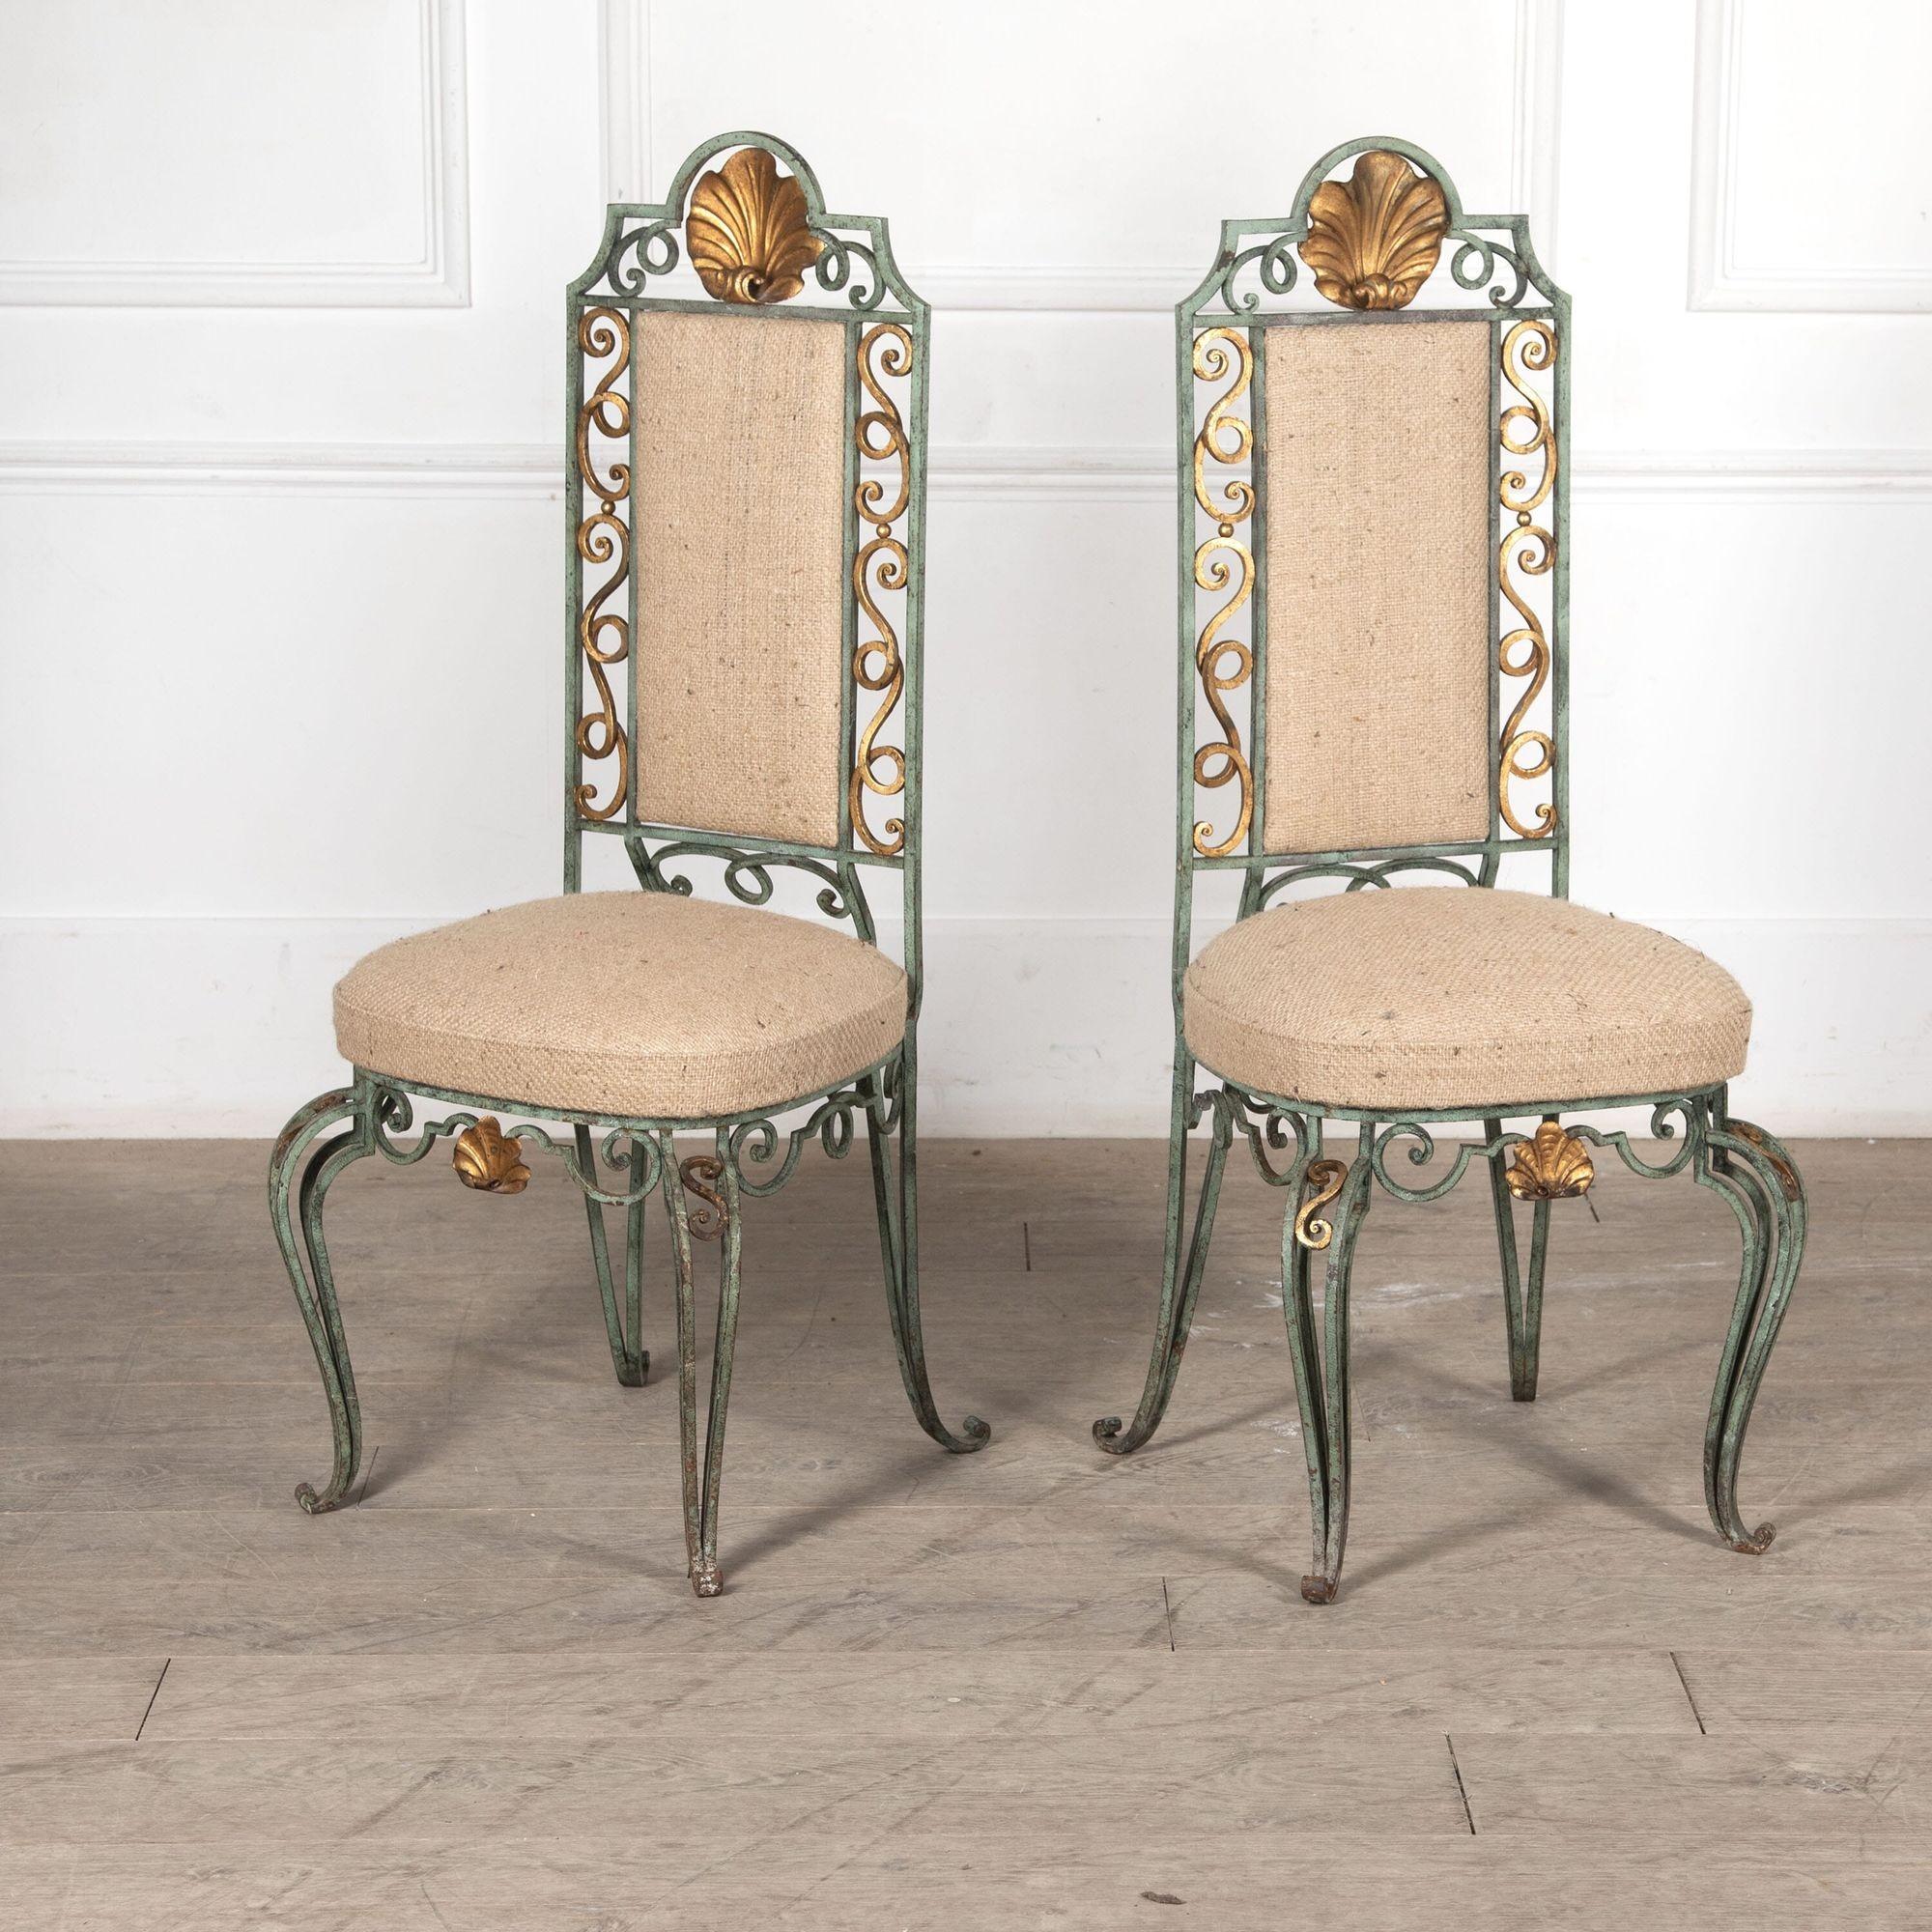 Set of six elegant and regal 1940s wrought iron dining chairs with twisted and curlicue detailing.
The frames are hammered iron with elaborate scrollwork in verdigris and gold finish. The top crests have large shell shaped mouldings in gold